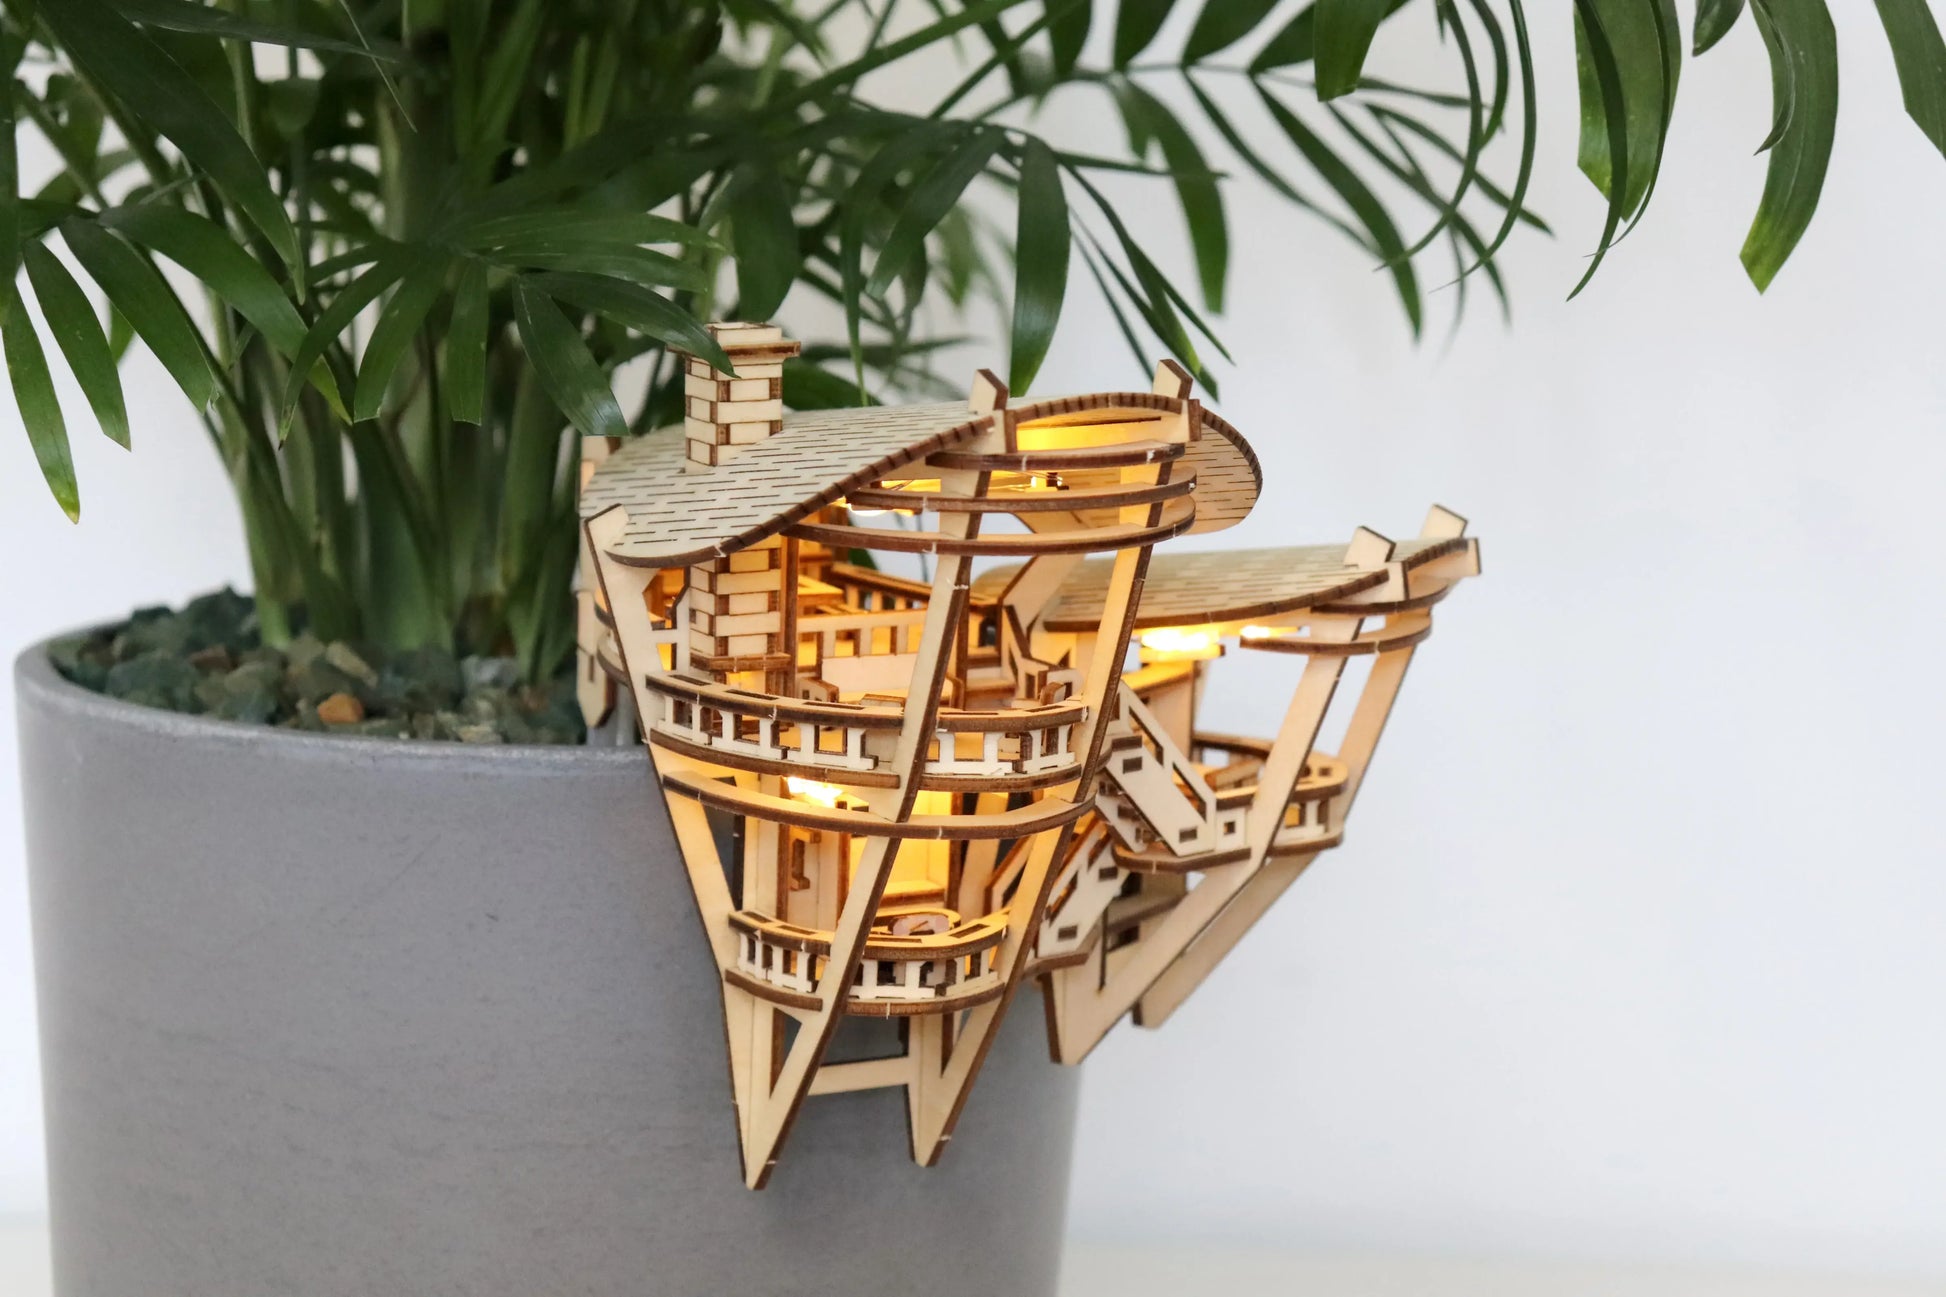 Small wooden treehouse with lights hanging on side of pot.